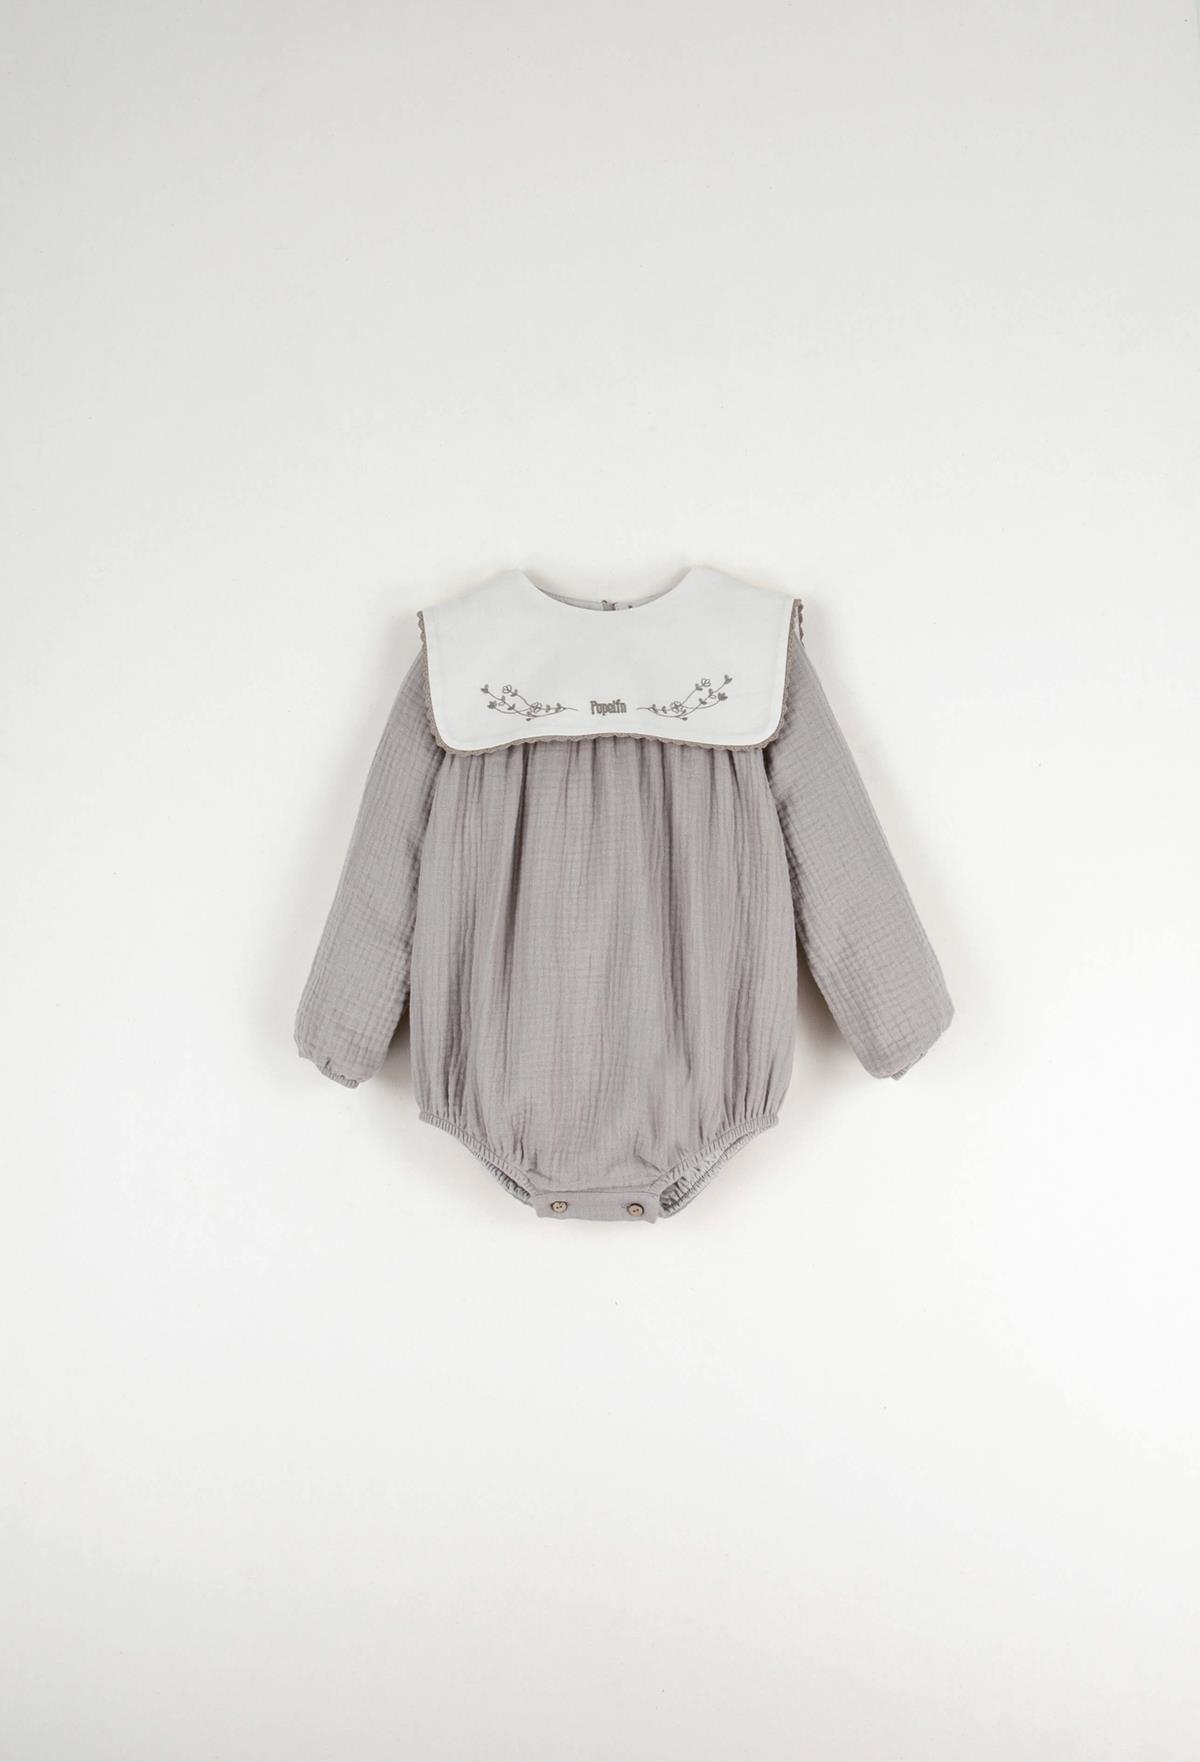 Mod.2.1 Taupe embroidered romper suit with yoke | AW22.23 Mod.2.1 Taupe embroidered romper suit with yoke